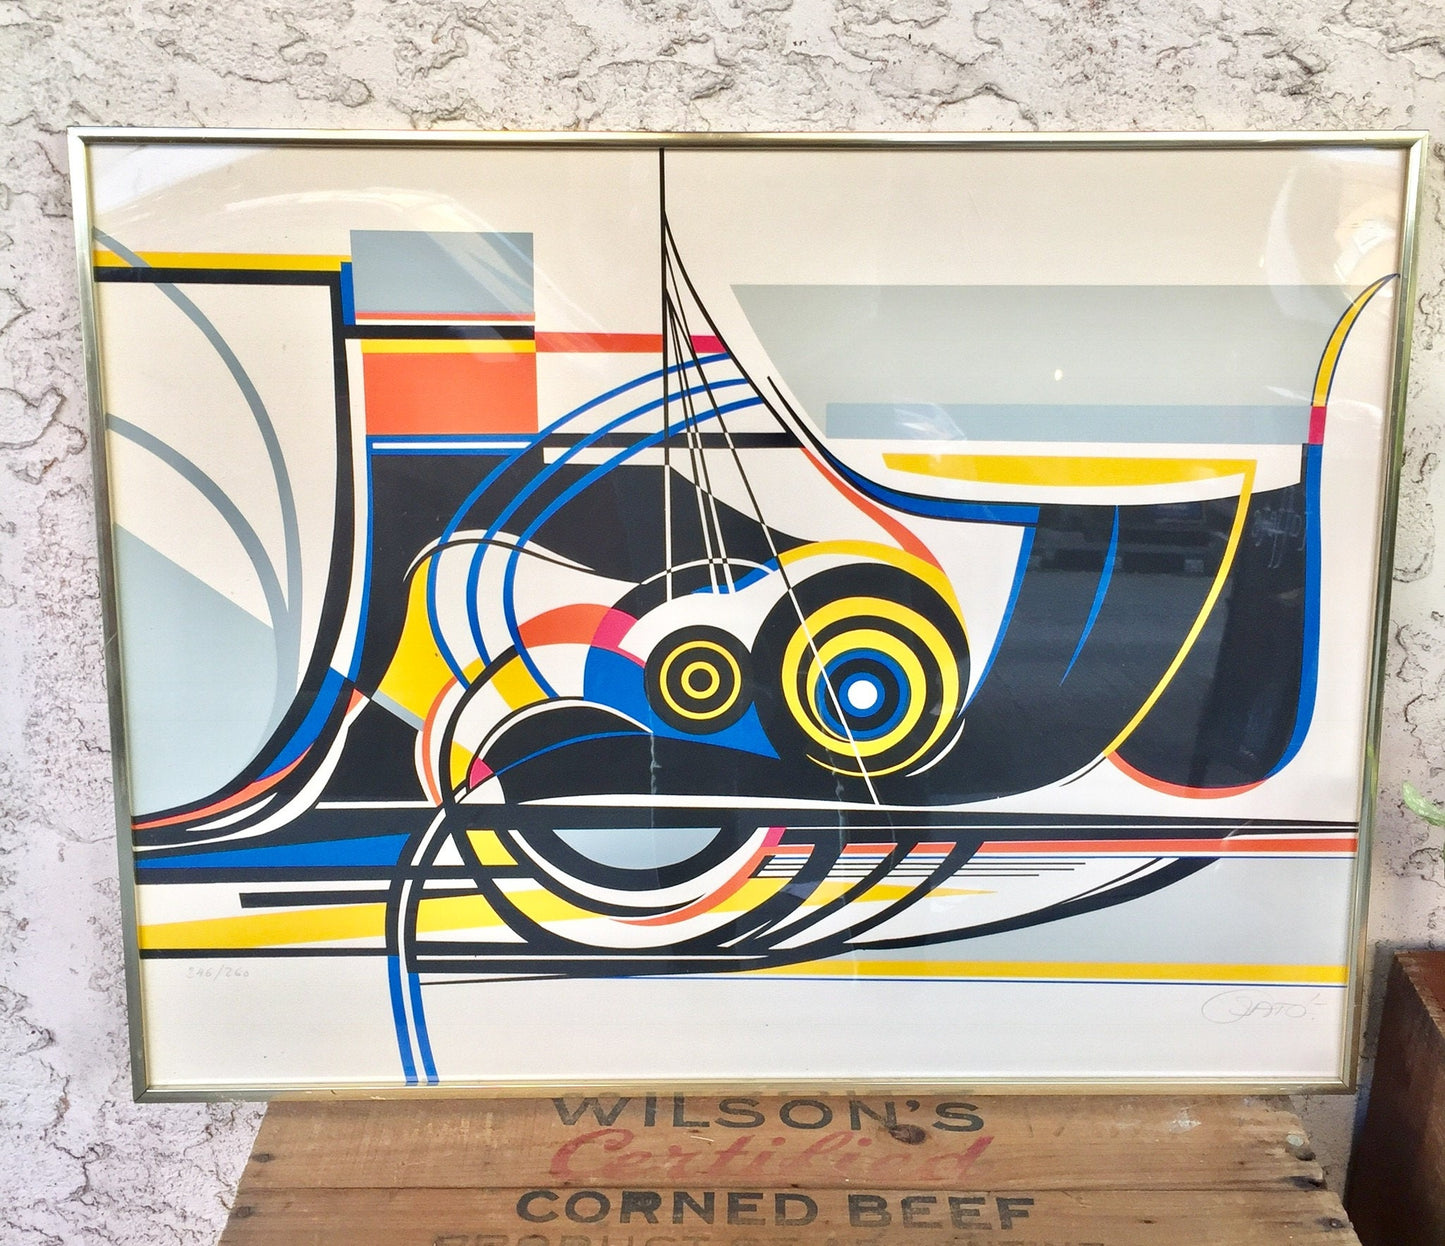 Abstract geometric artwork featuring overlapping circular and curved shapes in blue, red, yellow, black and white, resembling a stylized mechanical object or vehicle, signed by the artist Sato, displayed in a frame on a wooden surface against a textured white background.